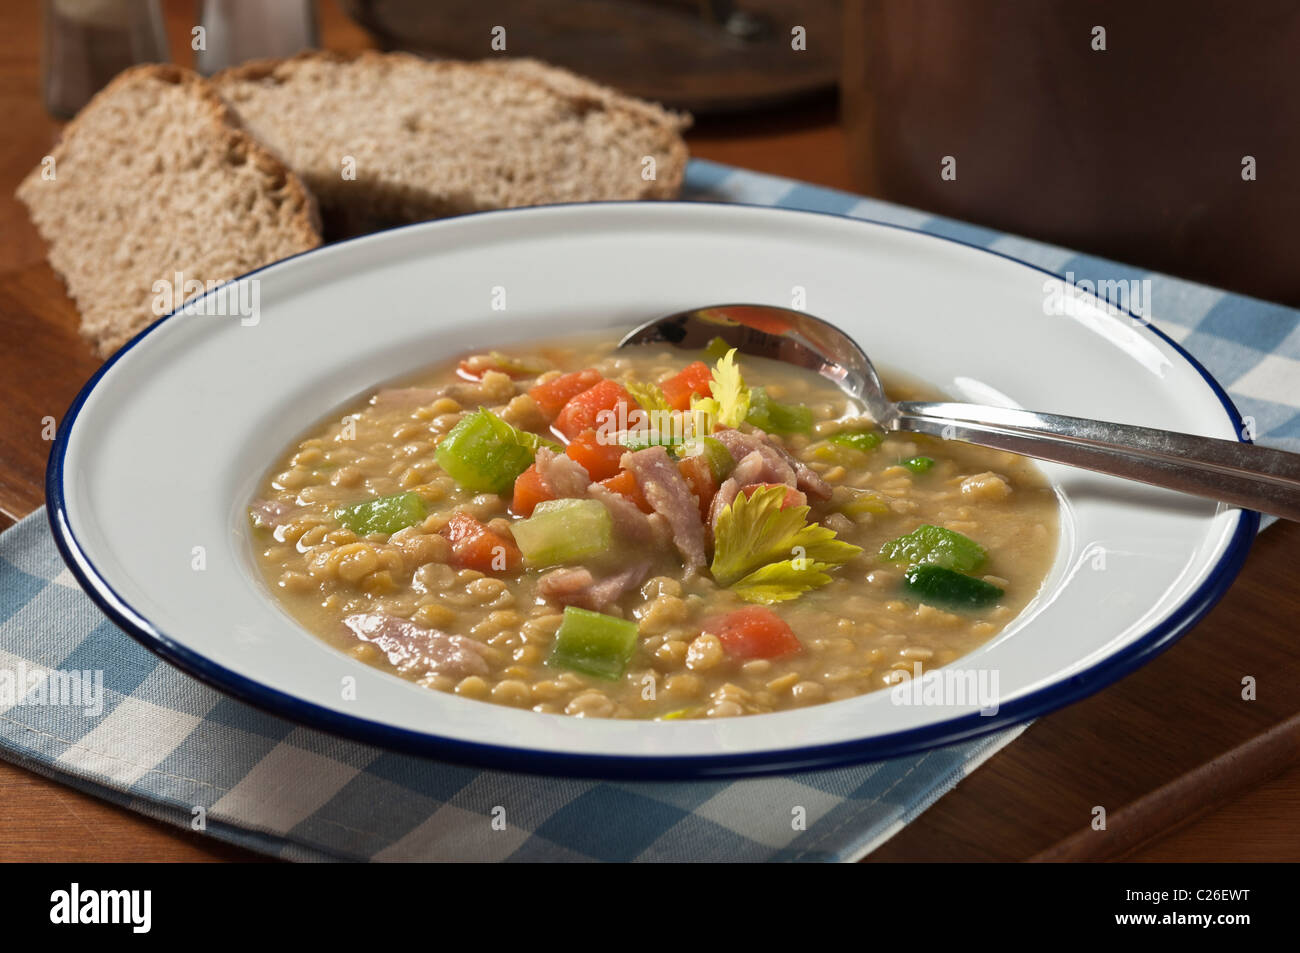 London Particular soup. Ham and yellow pea soup Stock Photo